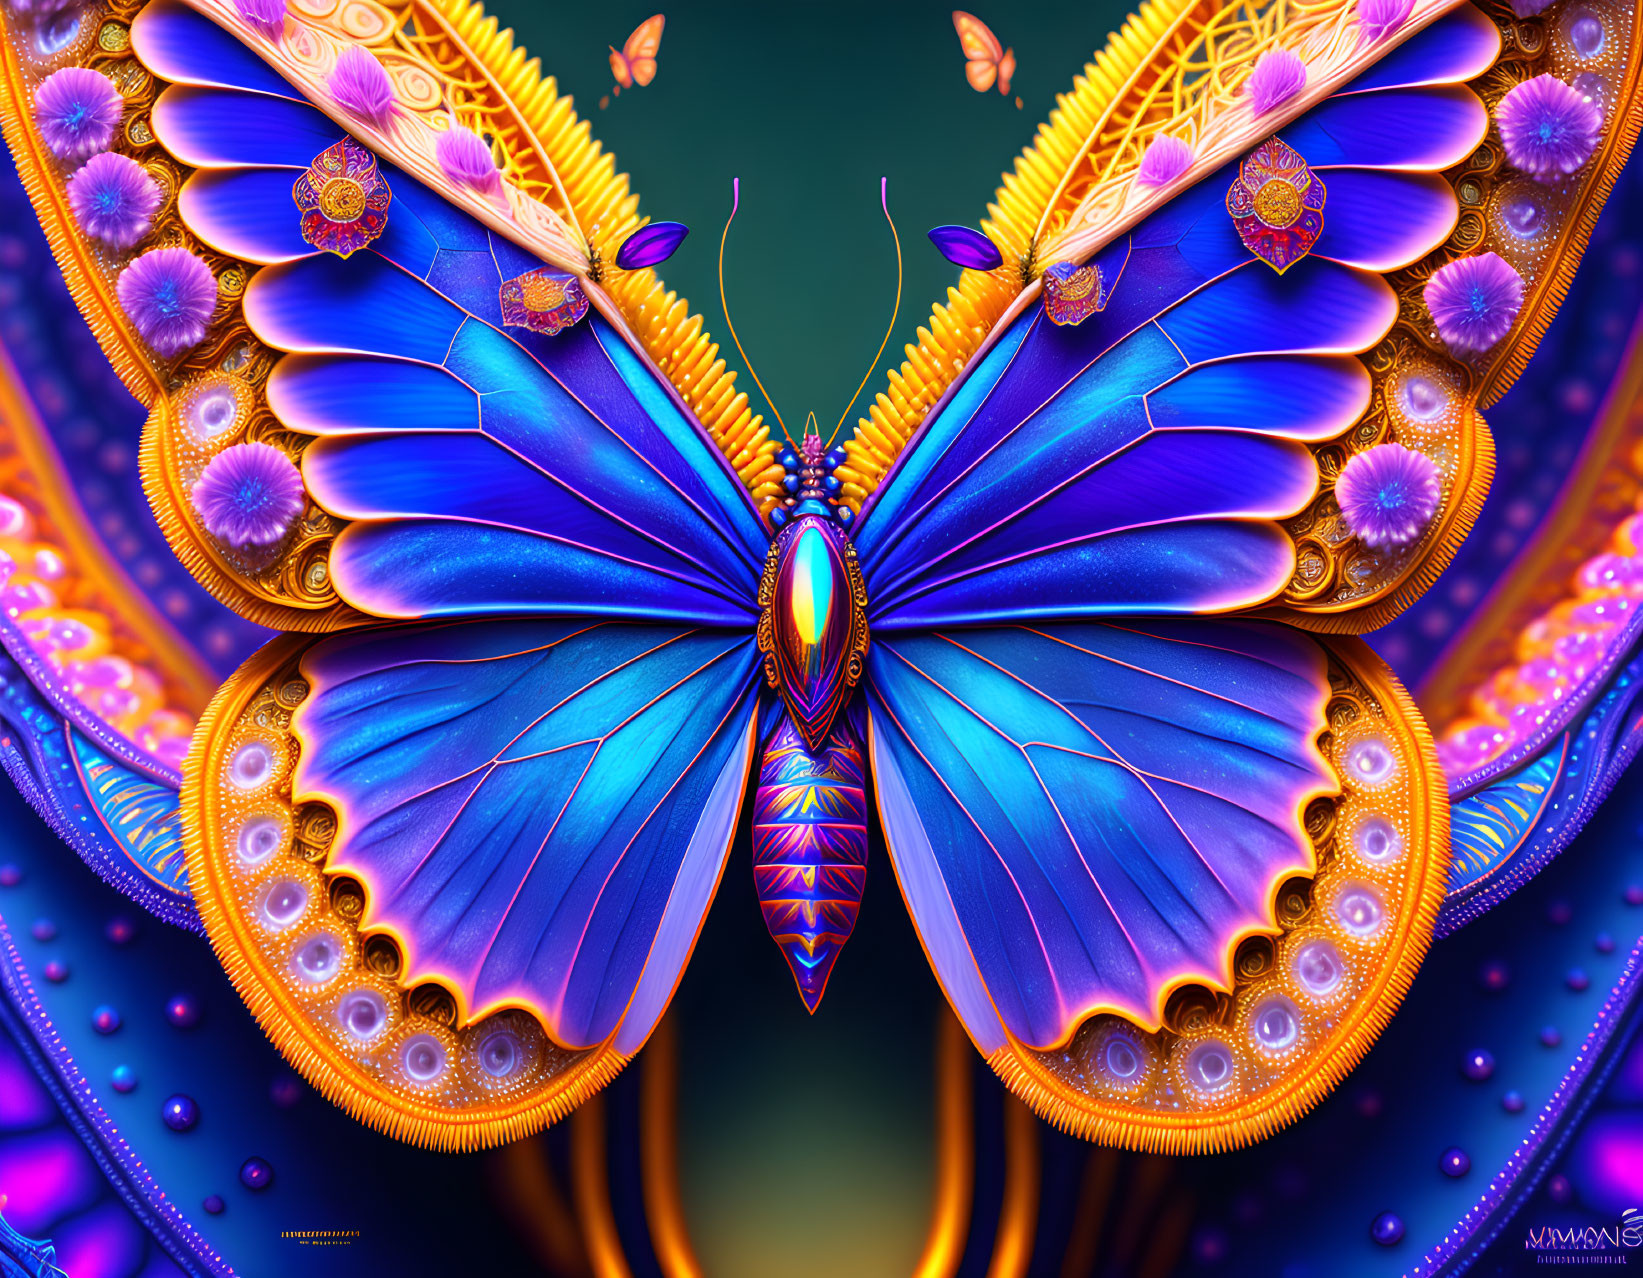 Intricate Blue and Gold Butterfly Art on Purple Background